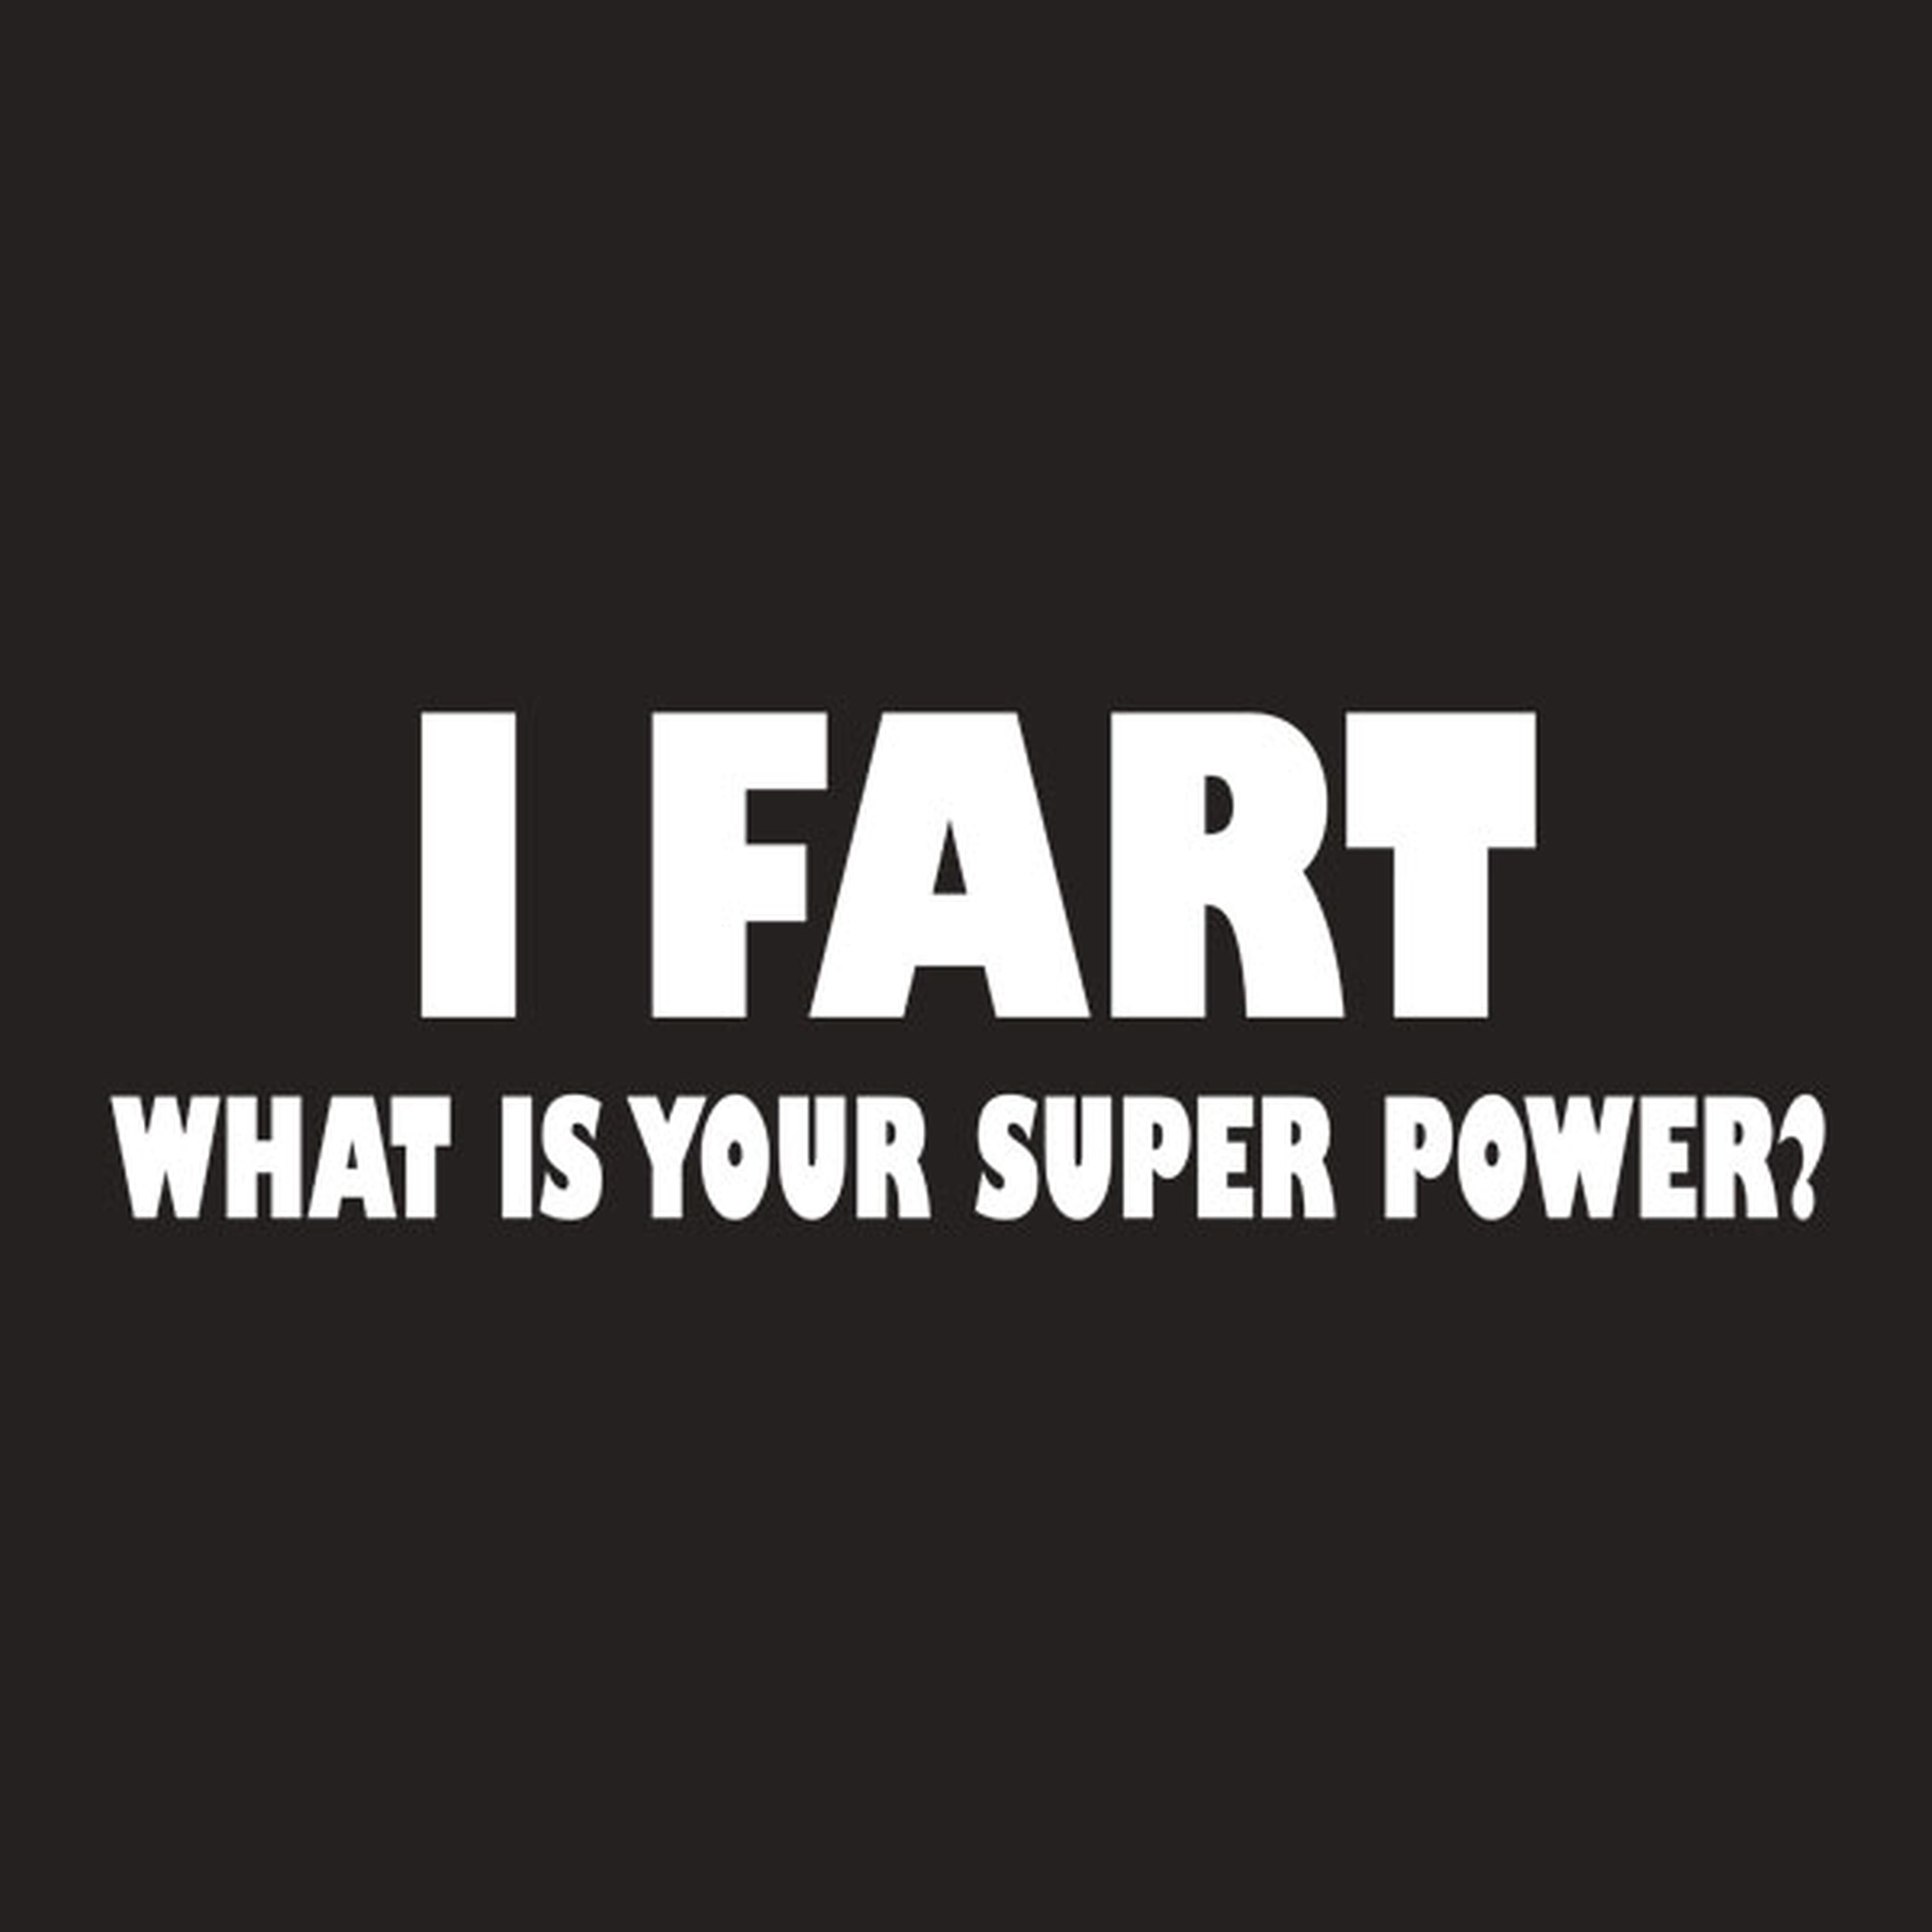 I fart, what is your superpower? - T-shirt